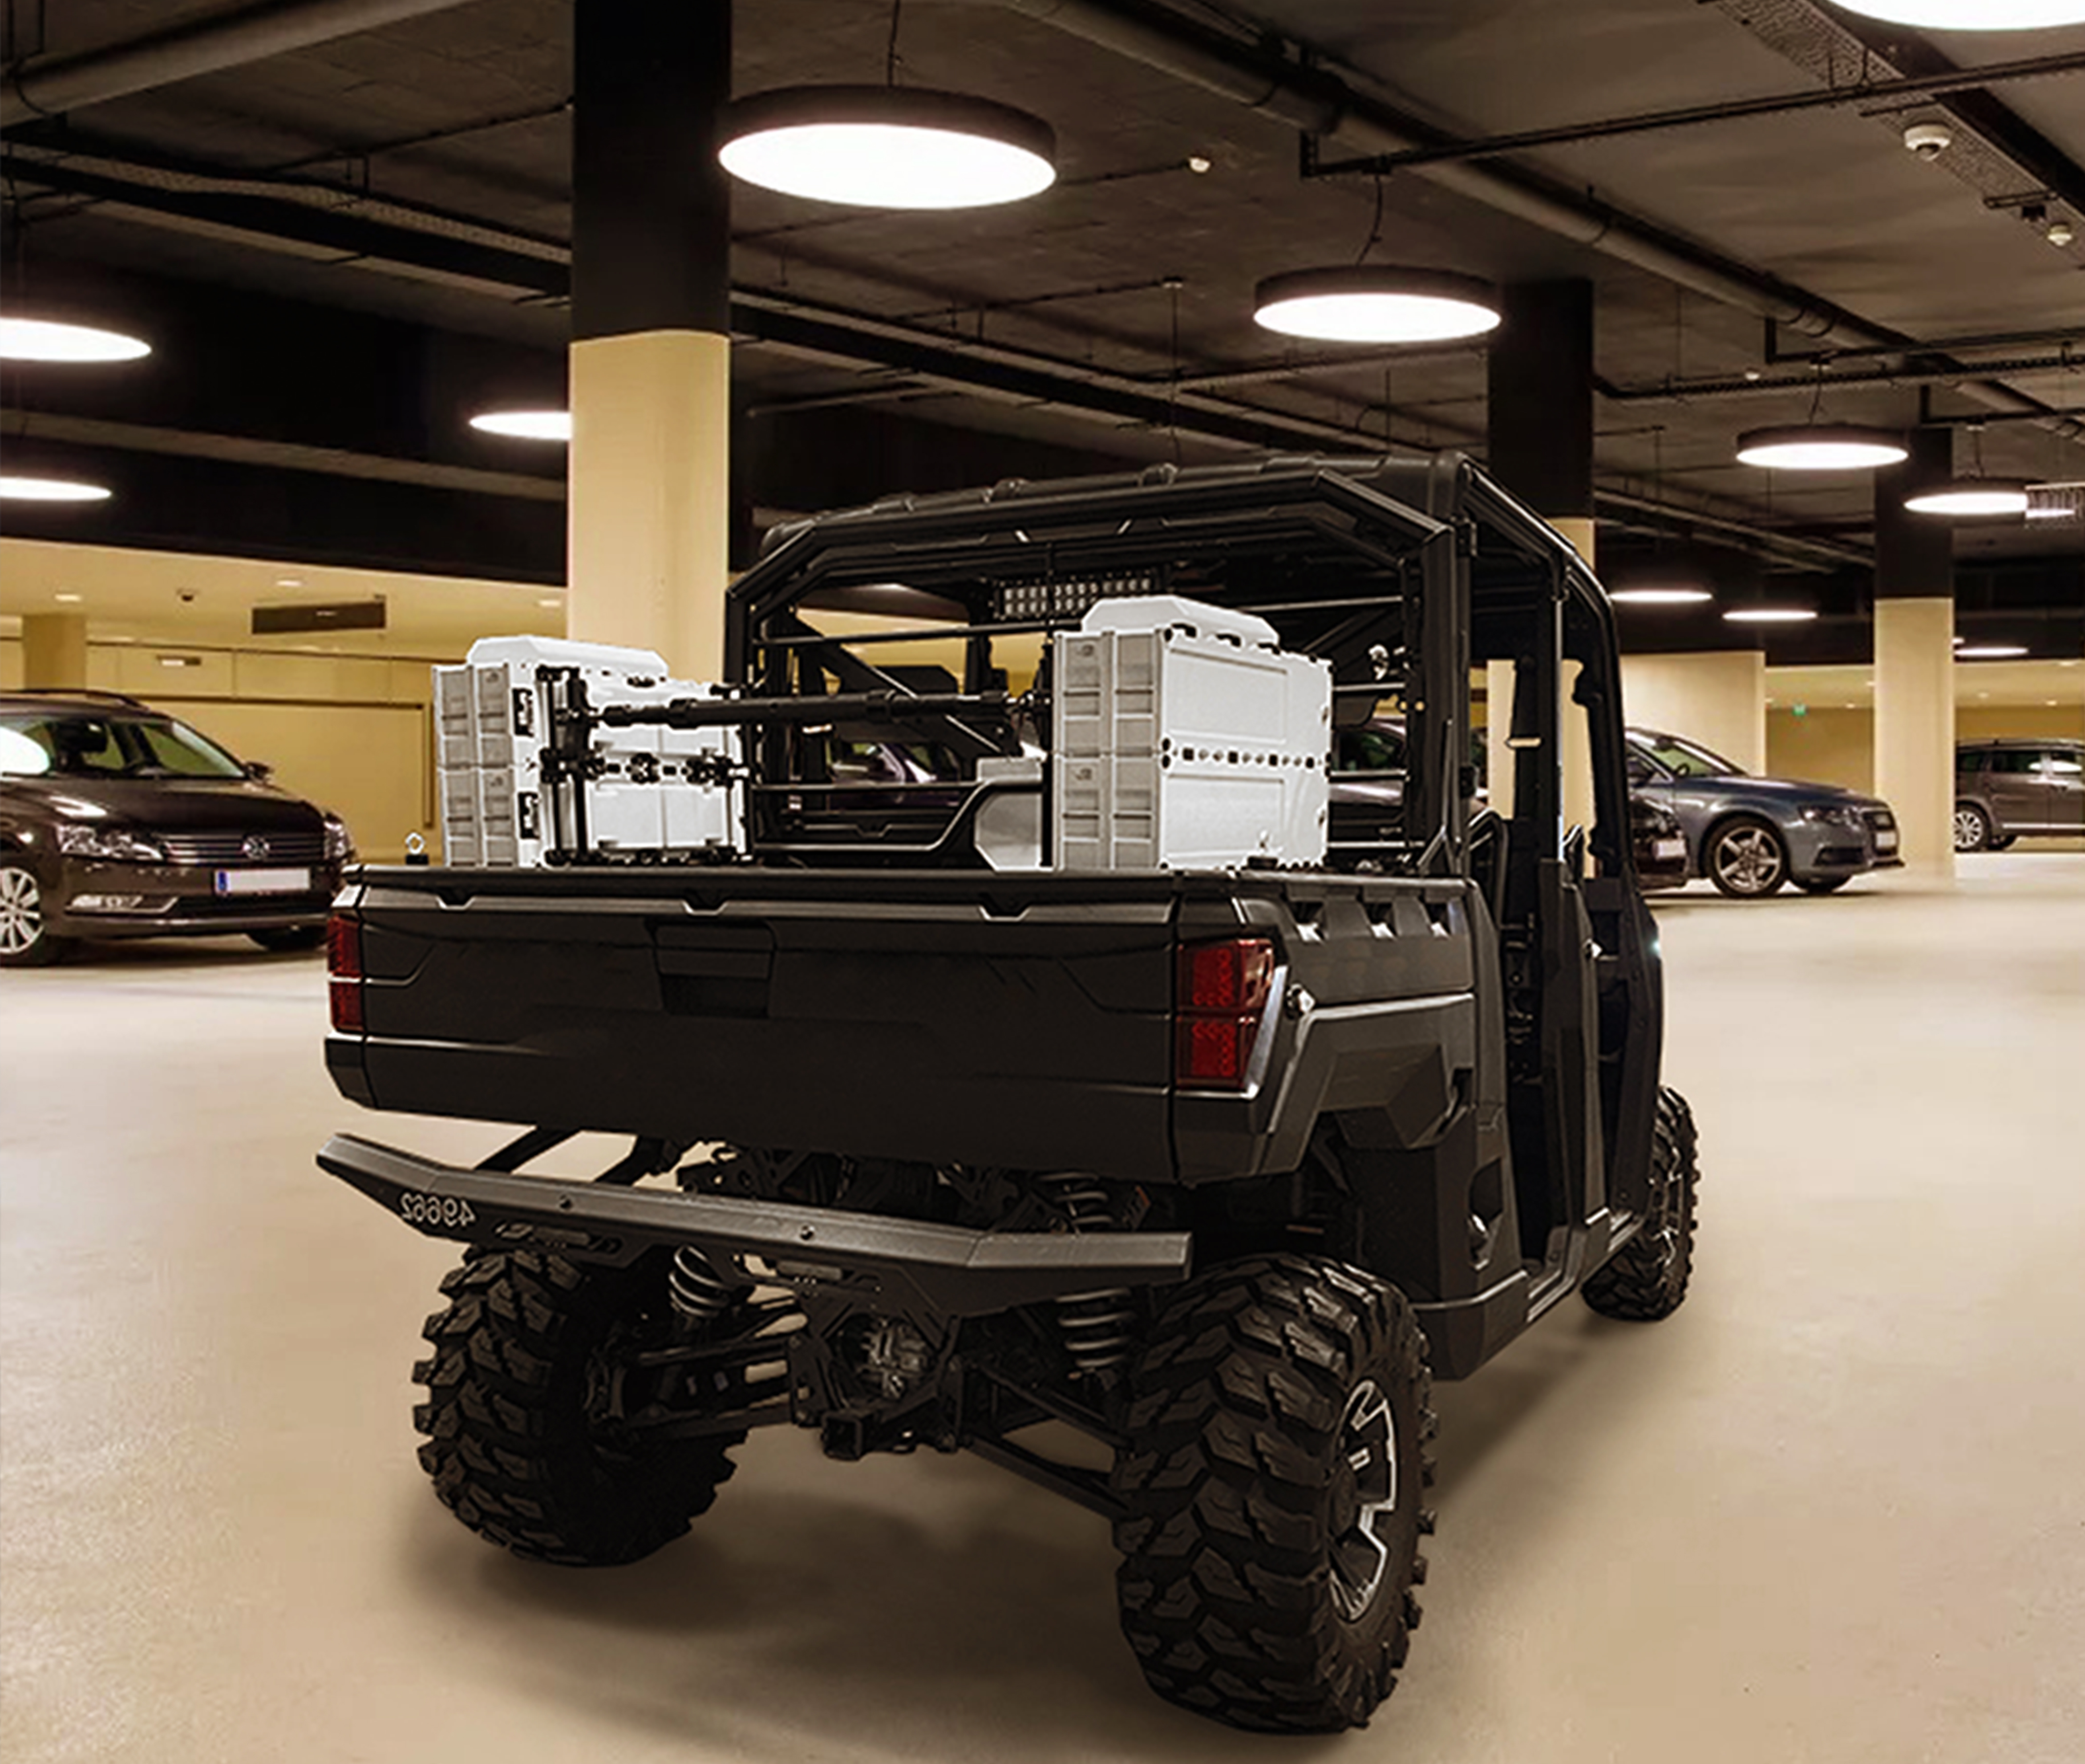 FlexSpec X8400 System mounted in the back of an ATV inside a parking garage